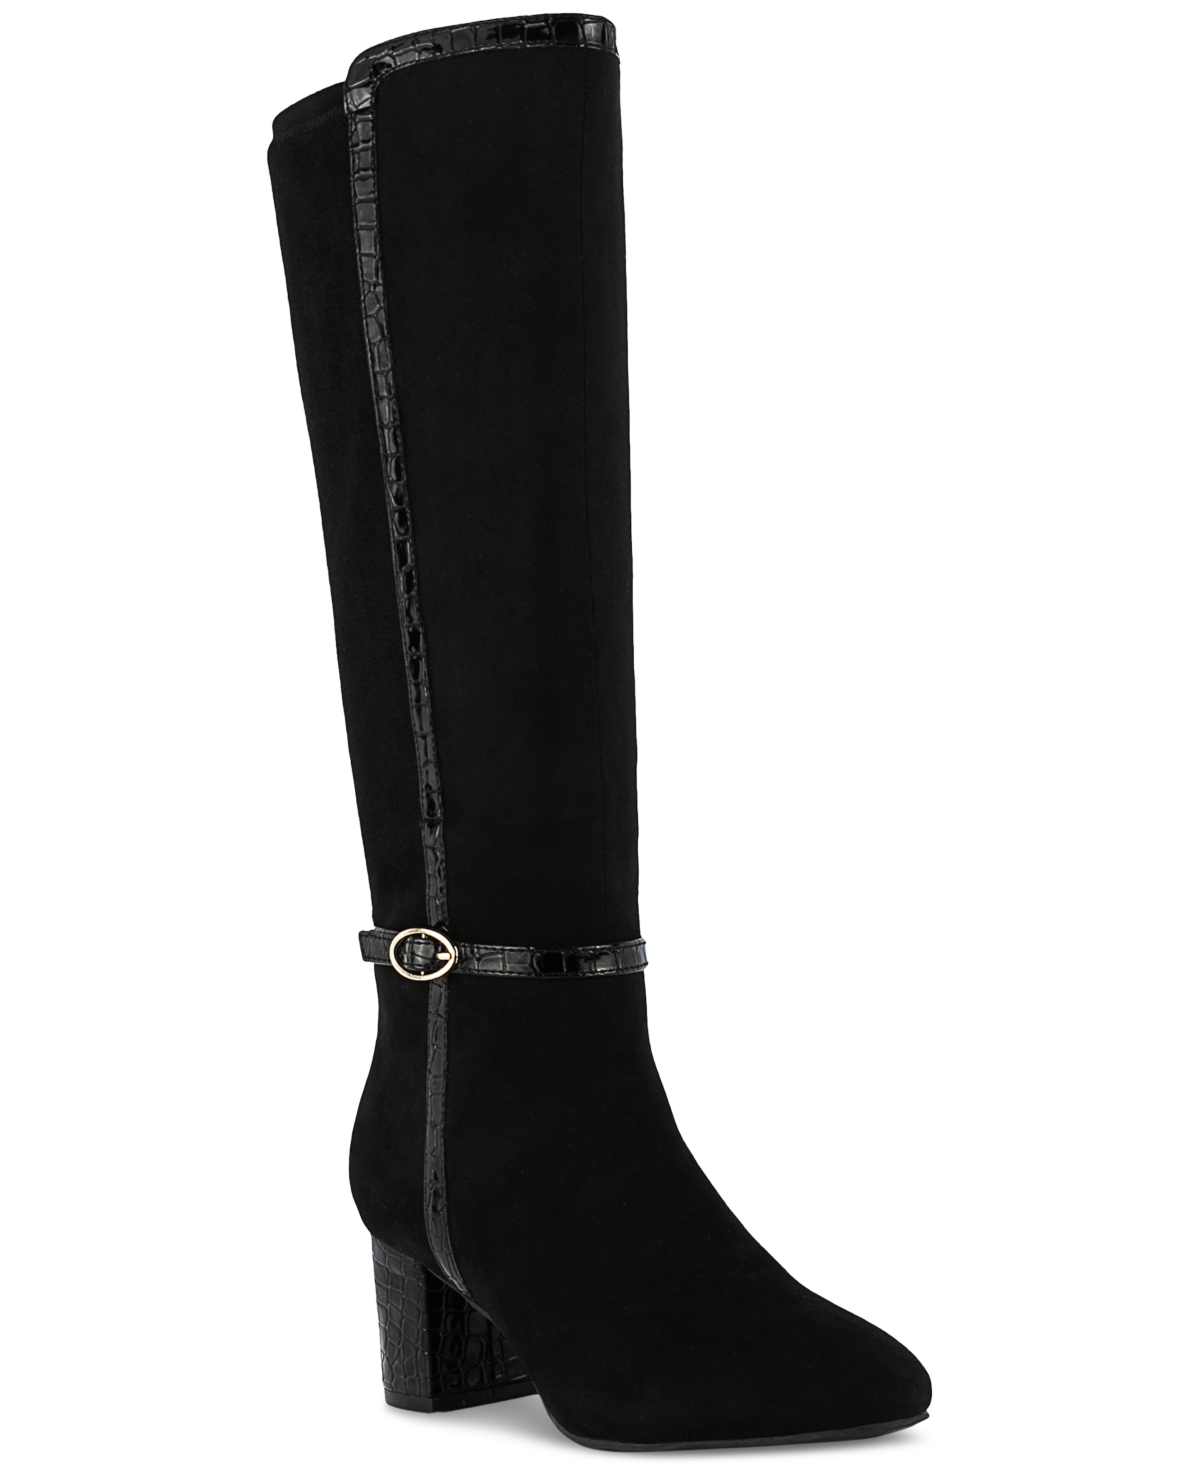 Isalee Buckled Zip Dress Boots, Created for Macy's - Black Micro